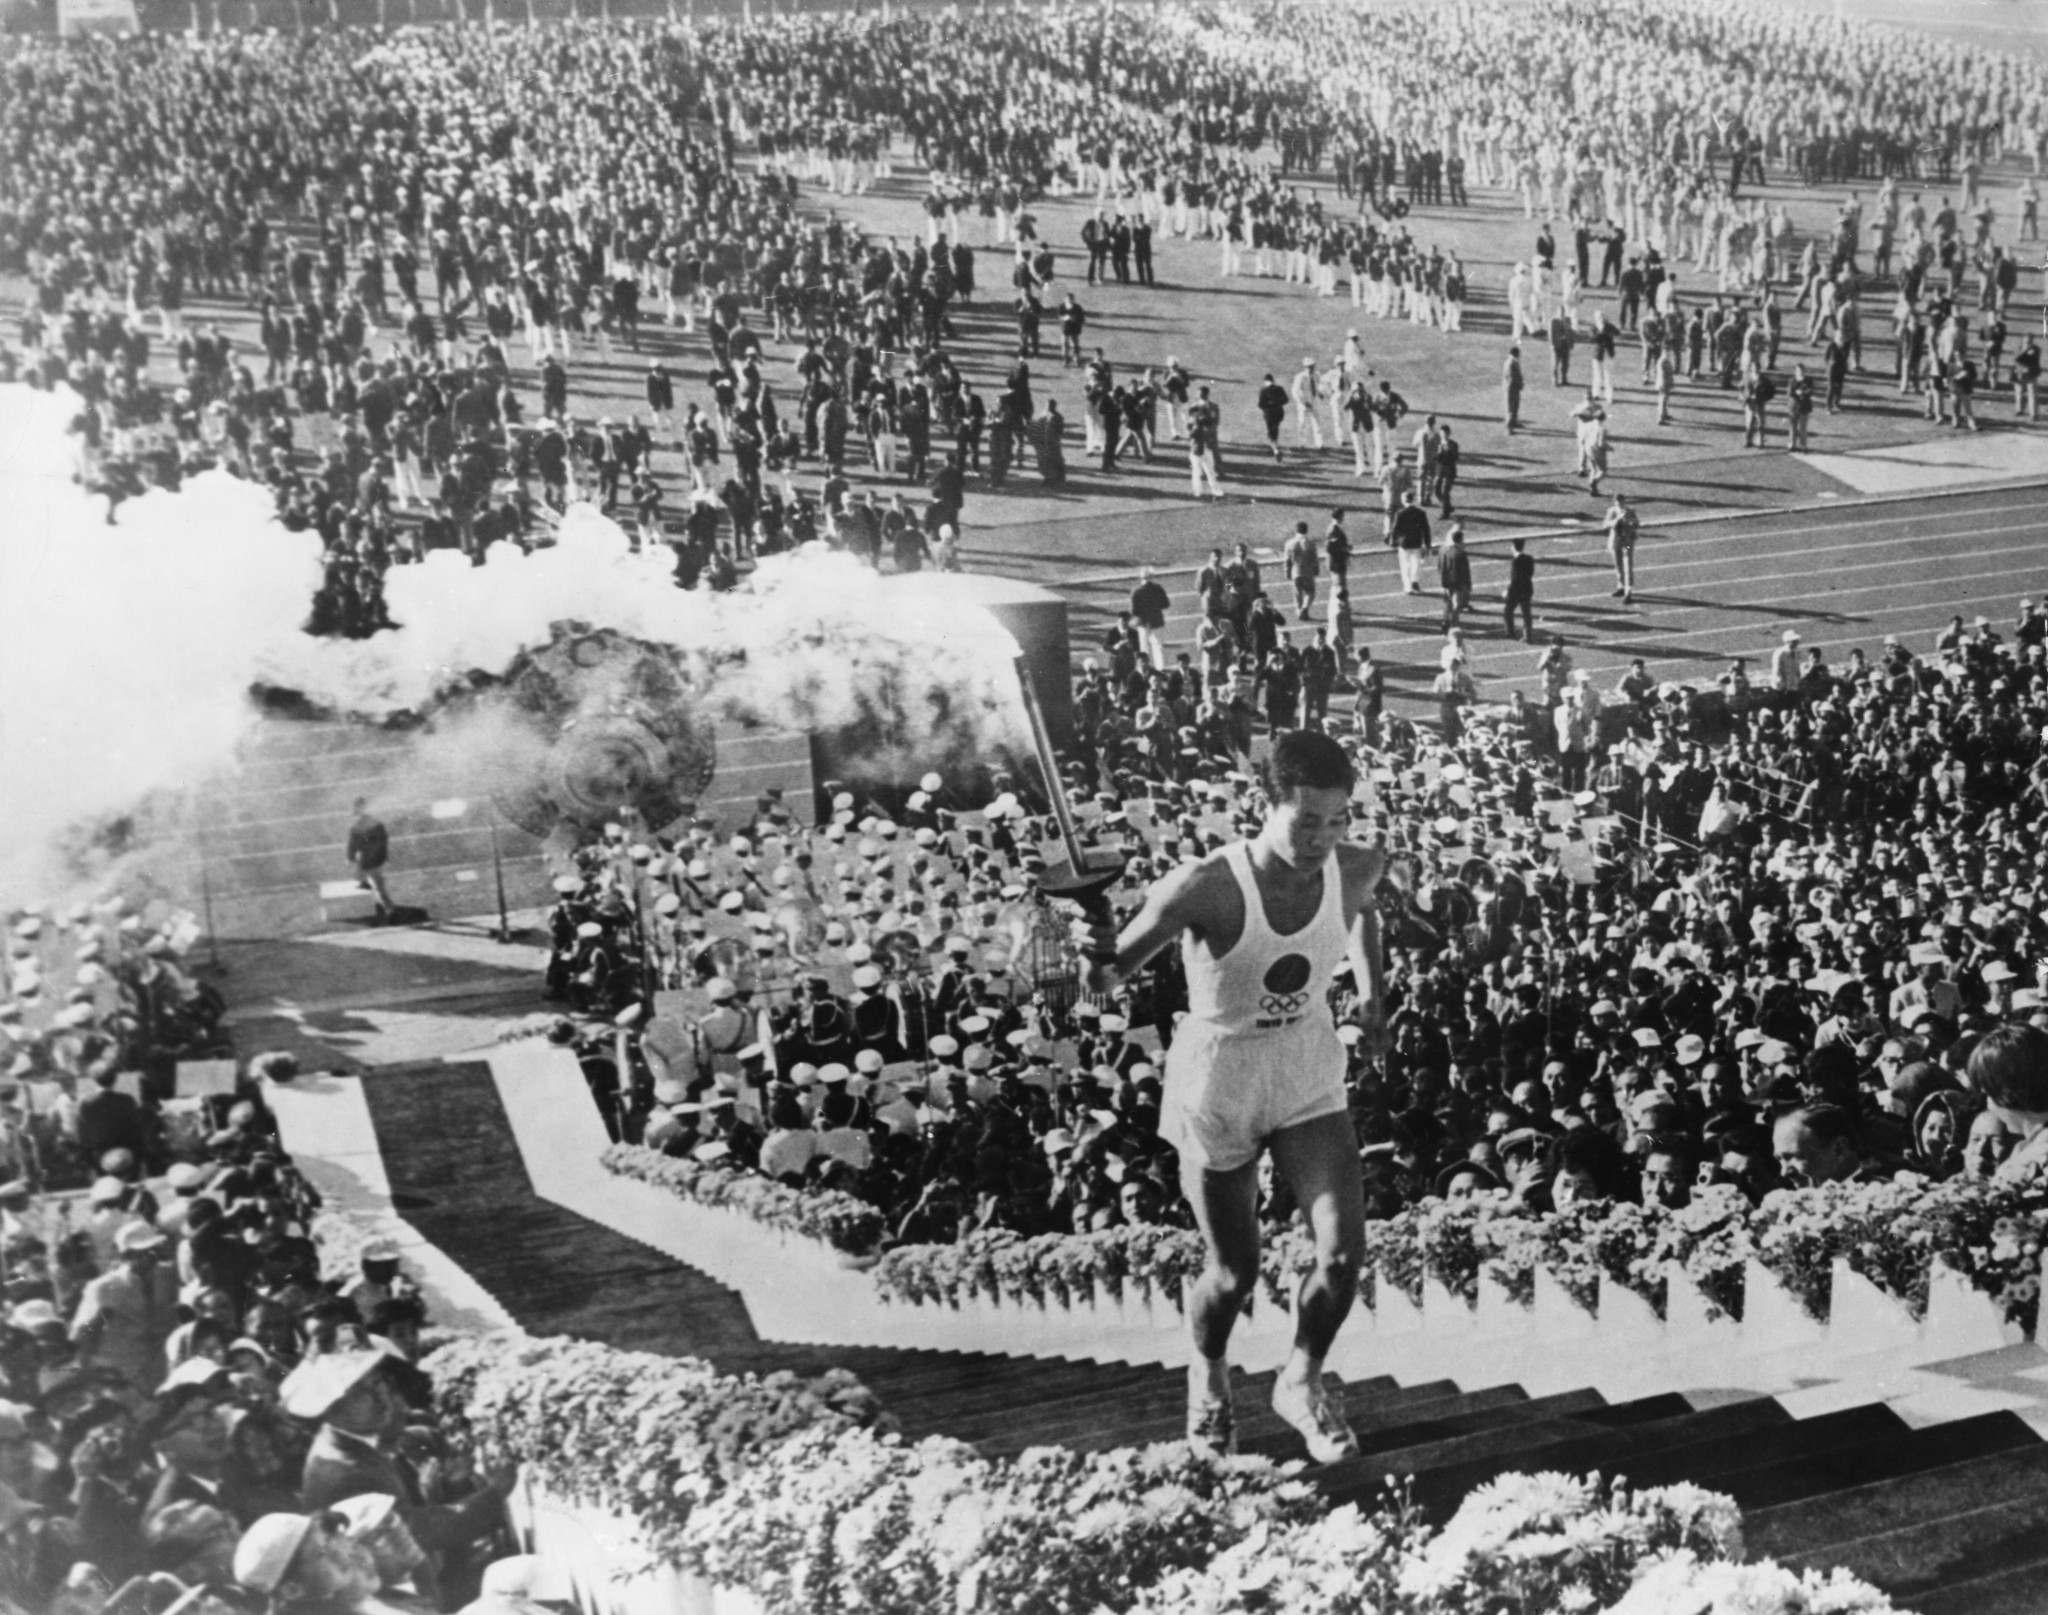 The Torch Relay for the 1964 Olympic Games started in Okinawa before travelling to Tokyo ©Getty Images